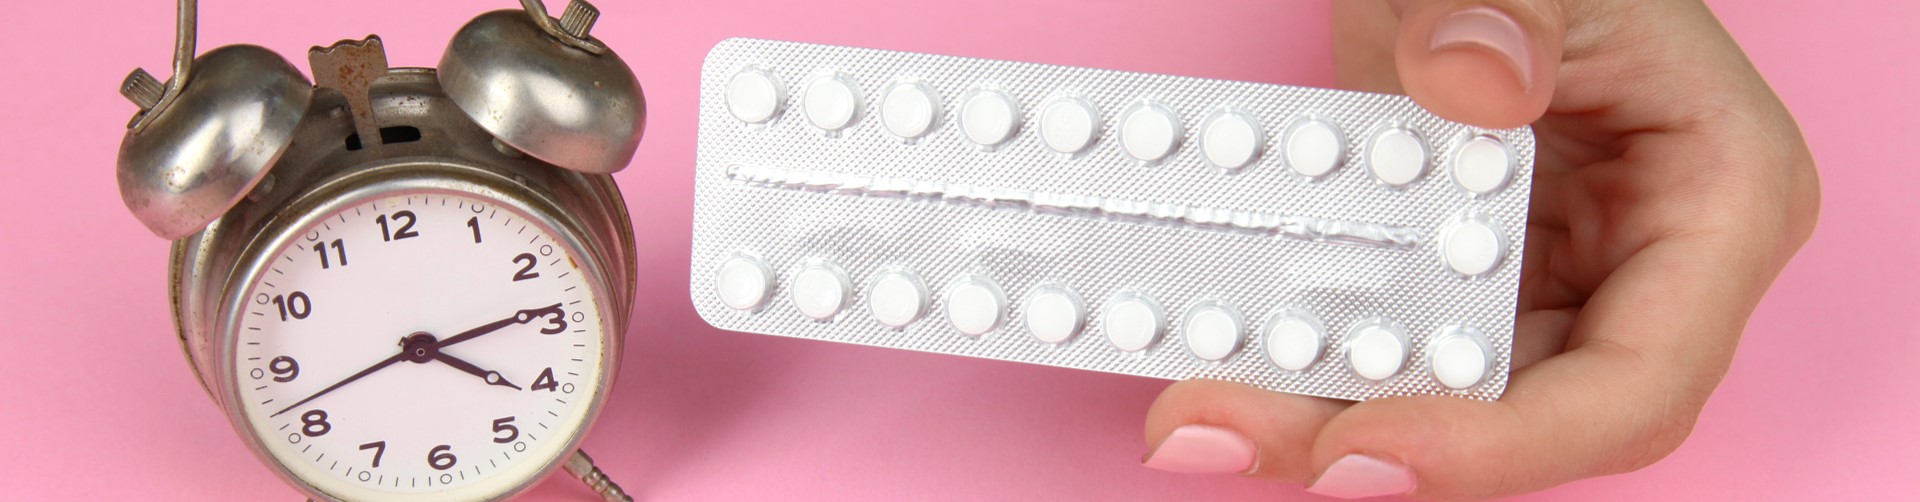 Photo of a contraceptive pill packet and a silver clock on a pink background